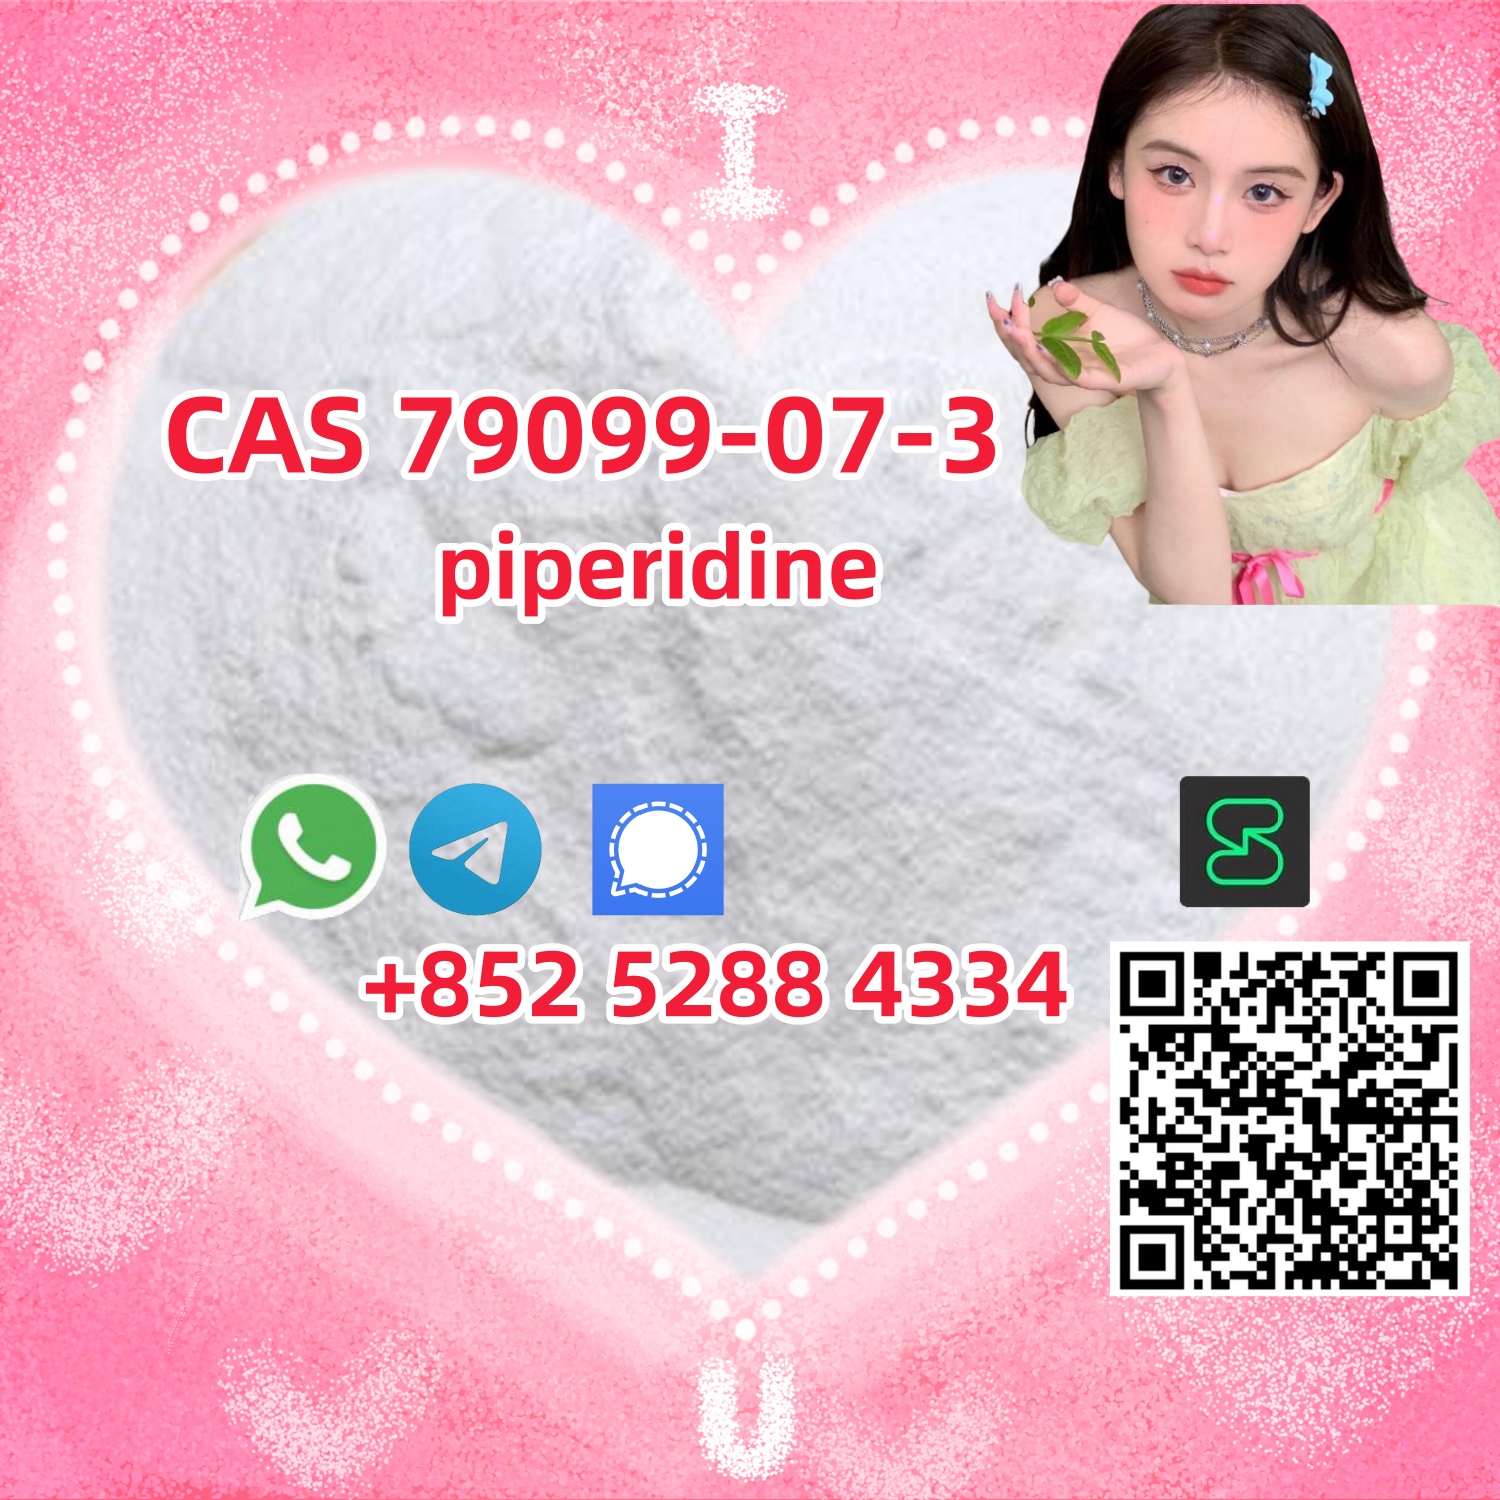 Sell high quality piperidine CAS:79099-07-3,iskele,Electronics & Home Appliances,Kitchen & Other Appliances